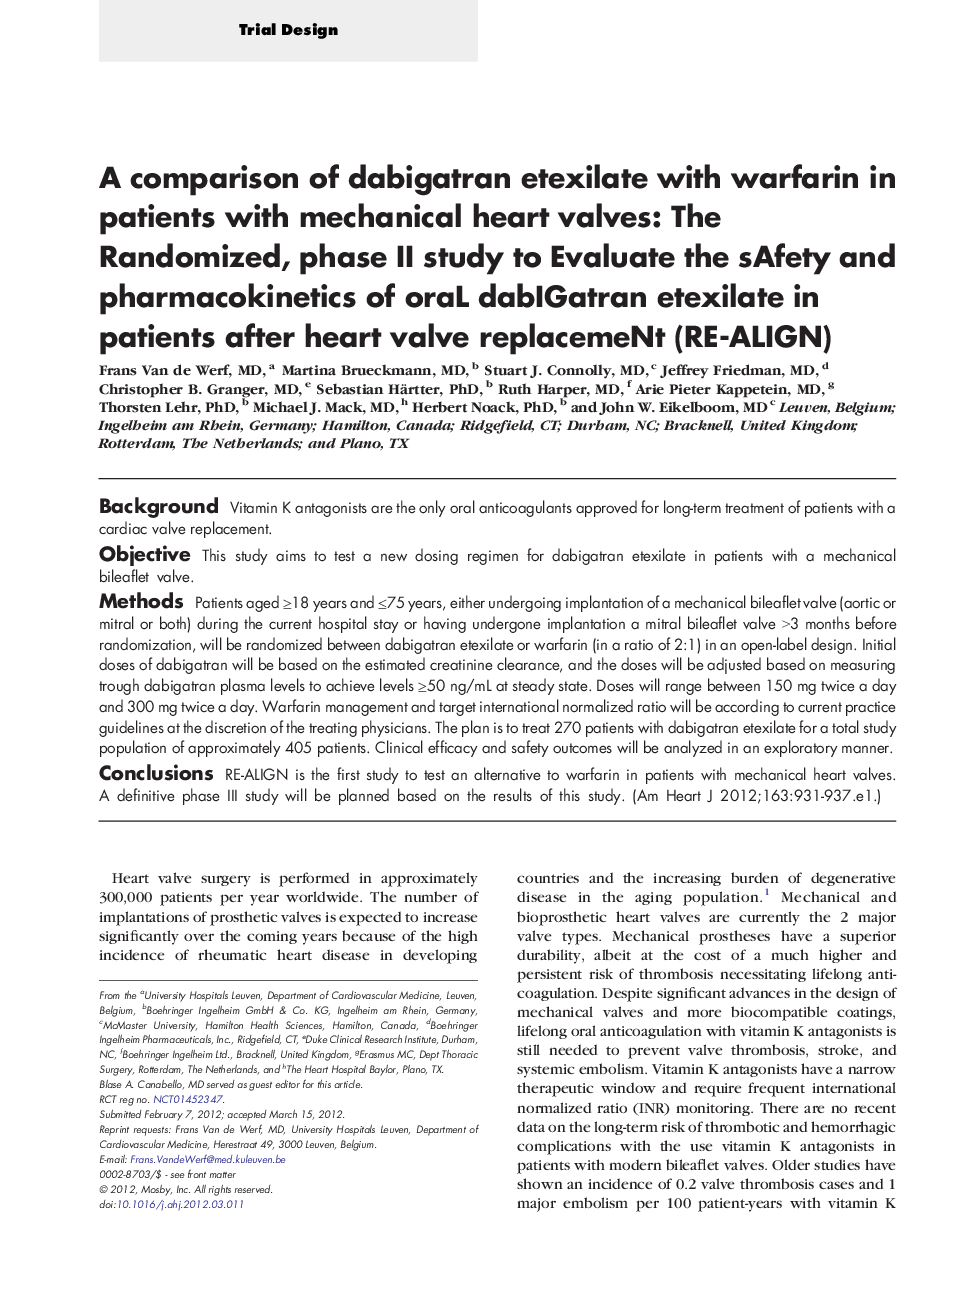 A comparison of dabigatran etexilate with warfarin in patients with mechanical heart valves: The Randomized, phase II study to Evaluate the sAfety and pharmacokinetics of oraL dabIGatran etexilate in patients after heart valve replacemeNt (RE-ALIGN)